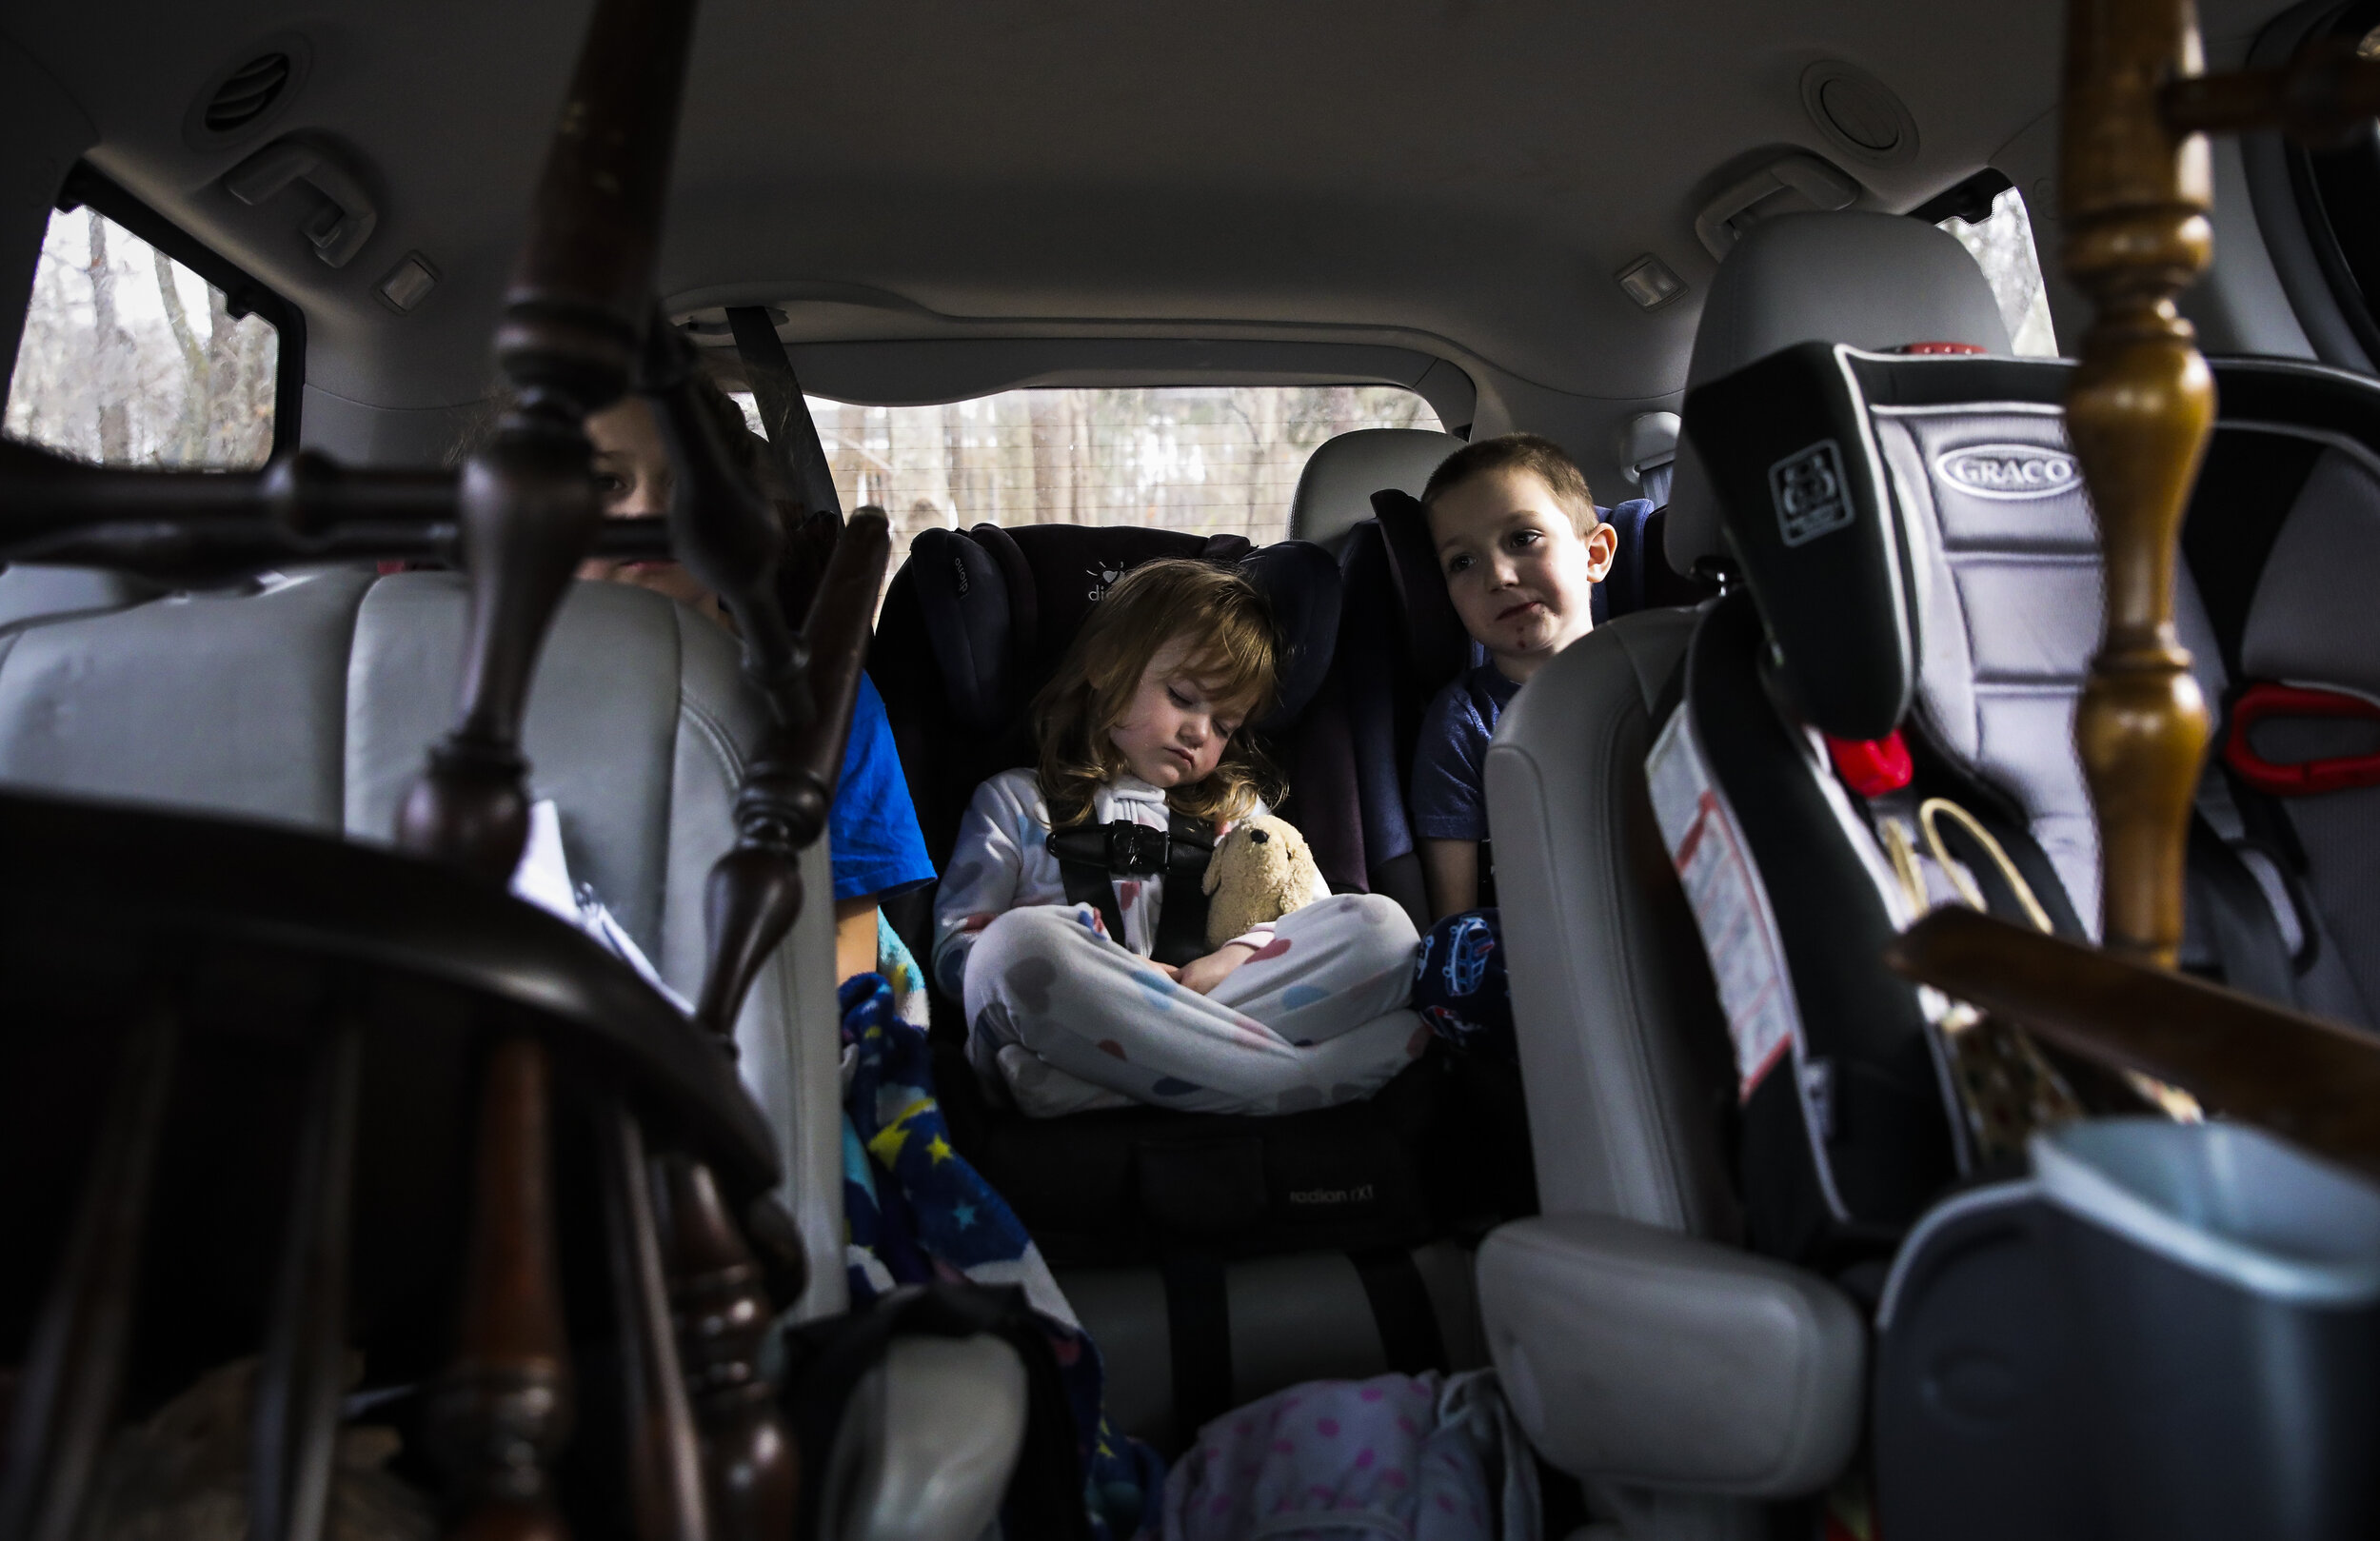  Laya Lupien sleeps in the back of  the van with her siblings amid dining room chairs and various odds and ends en route to the Lupiens new apartment in Dover, NH. Since July, the Lupien family has be